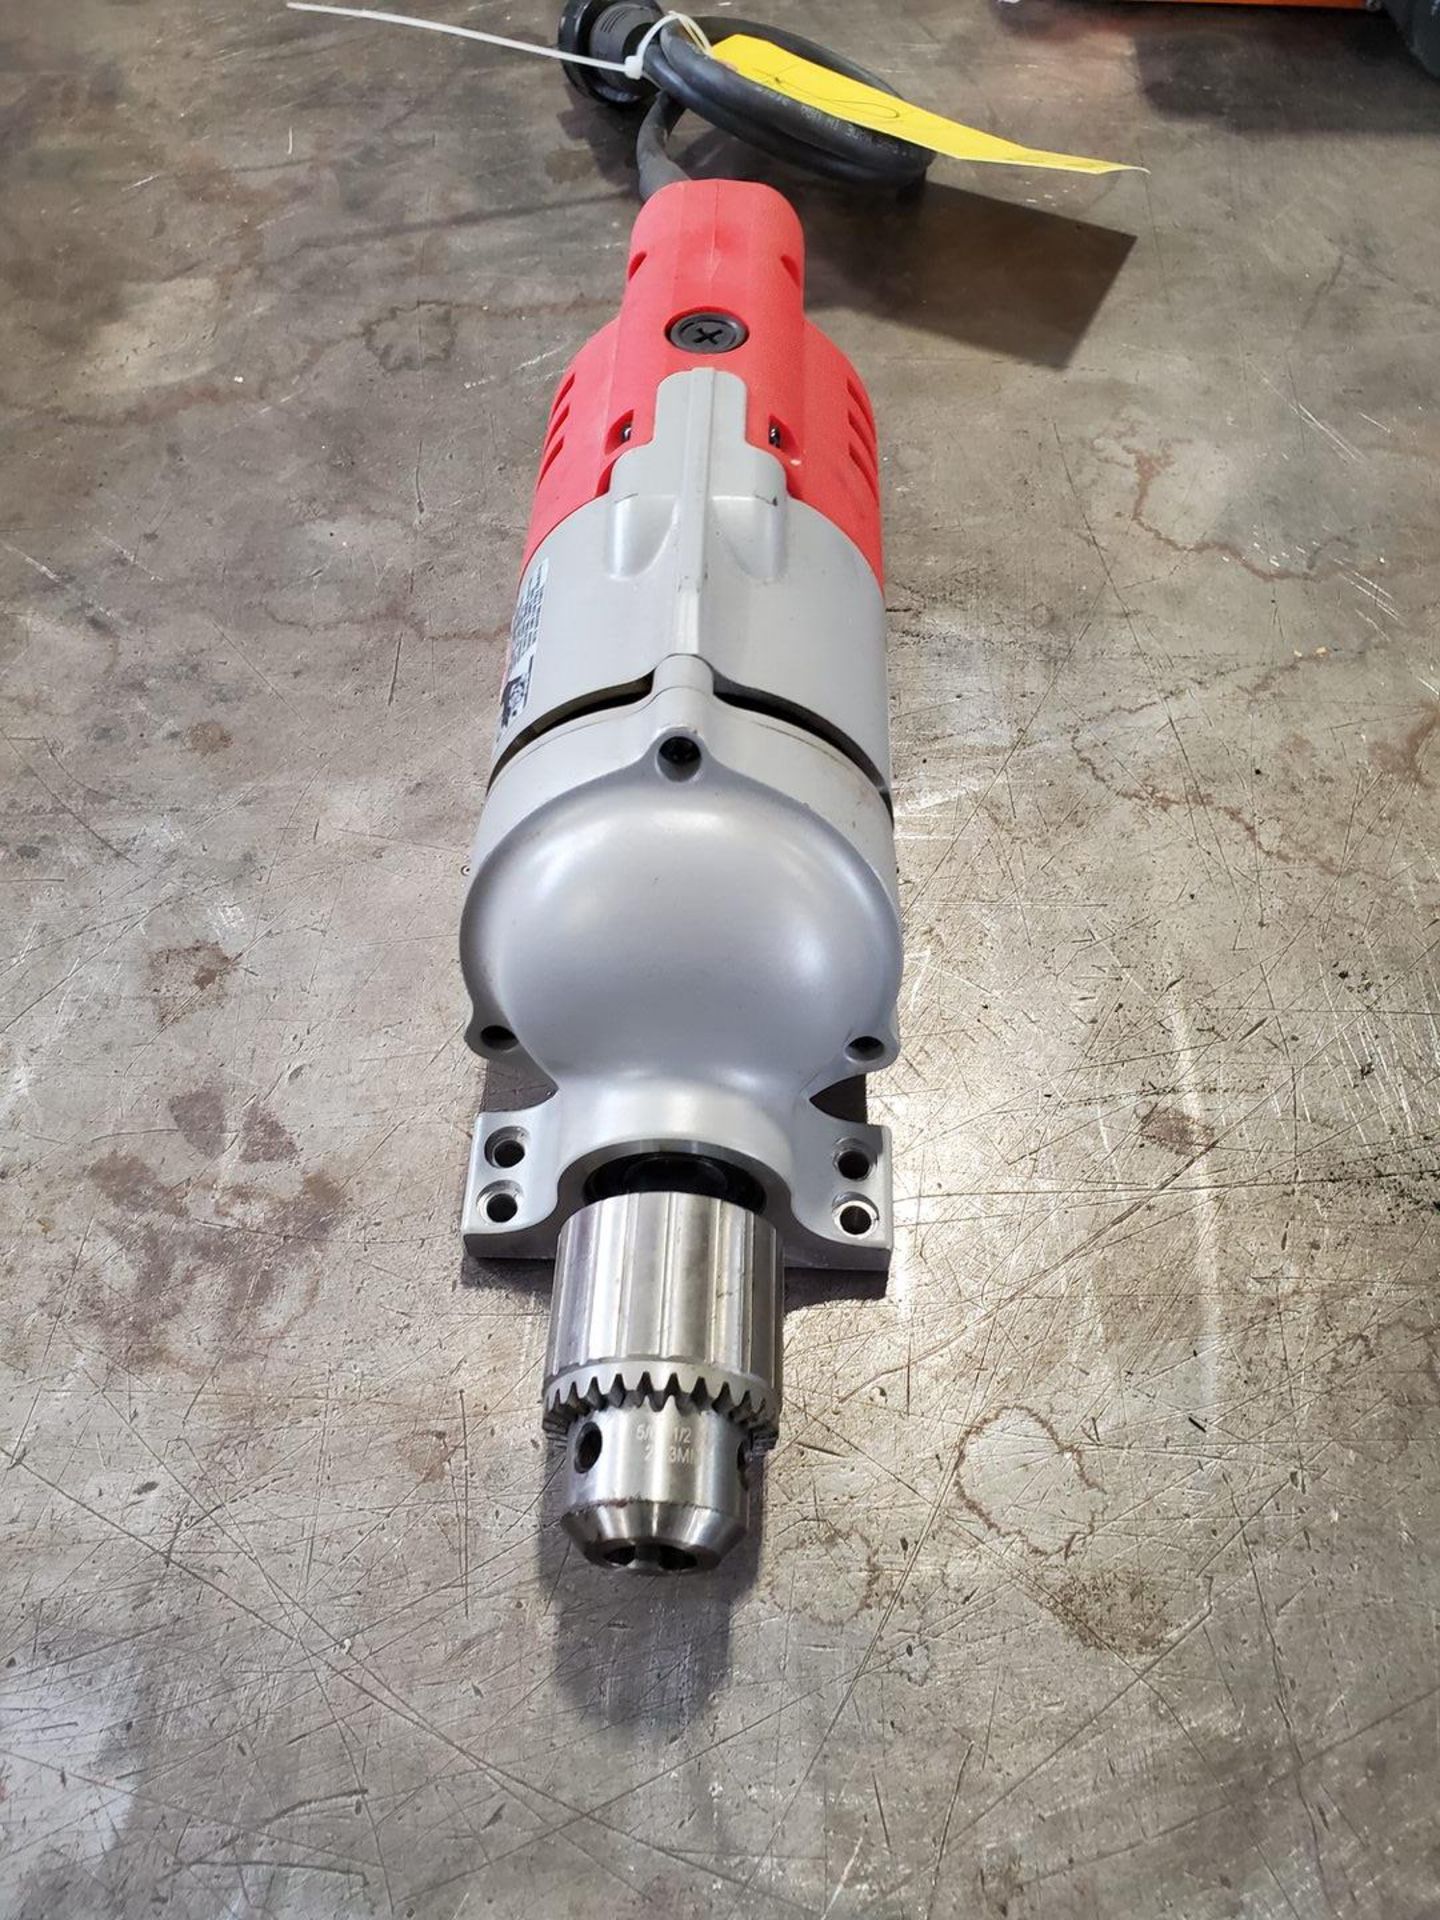 Miwaukee 1/2" Drill 120V, 60HZ, 6.2A - Image 3 of 6